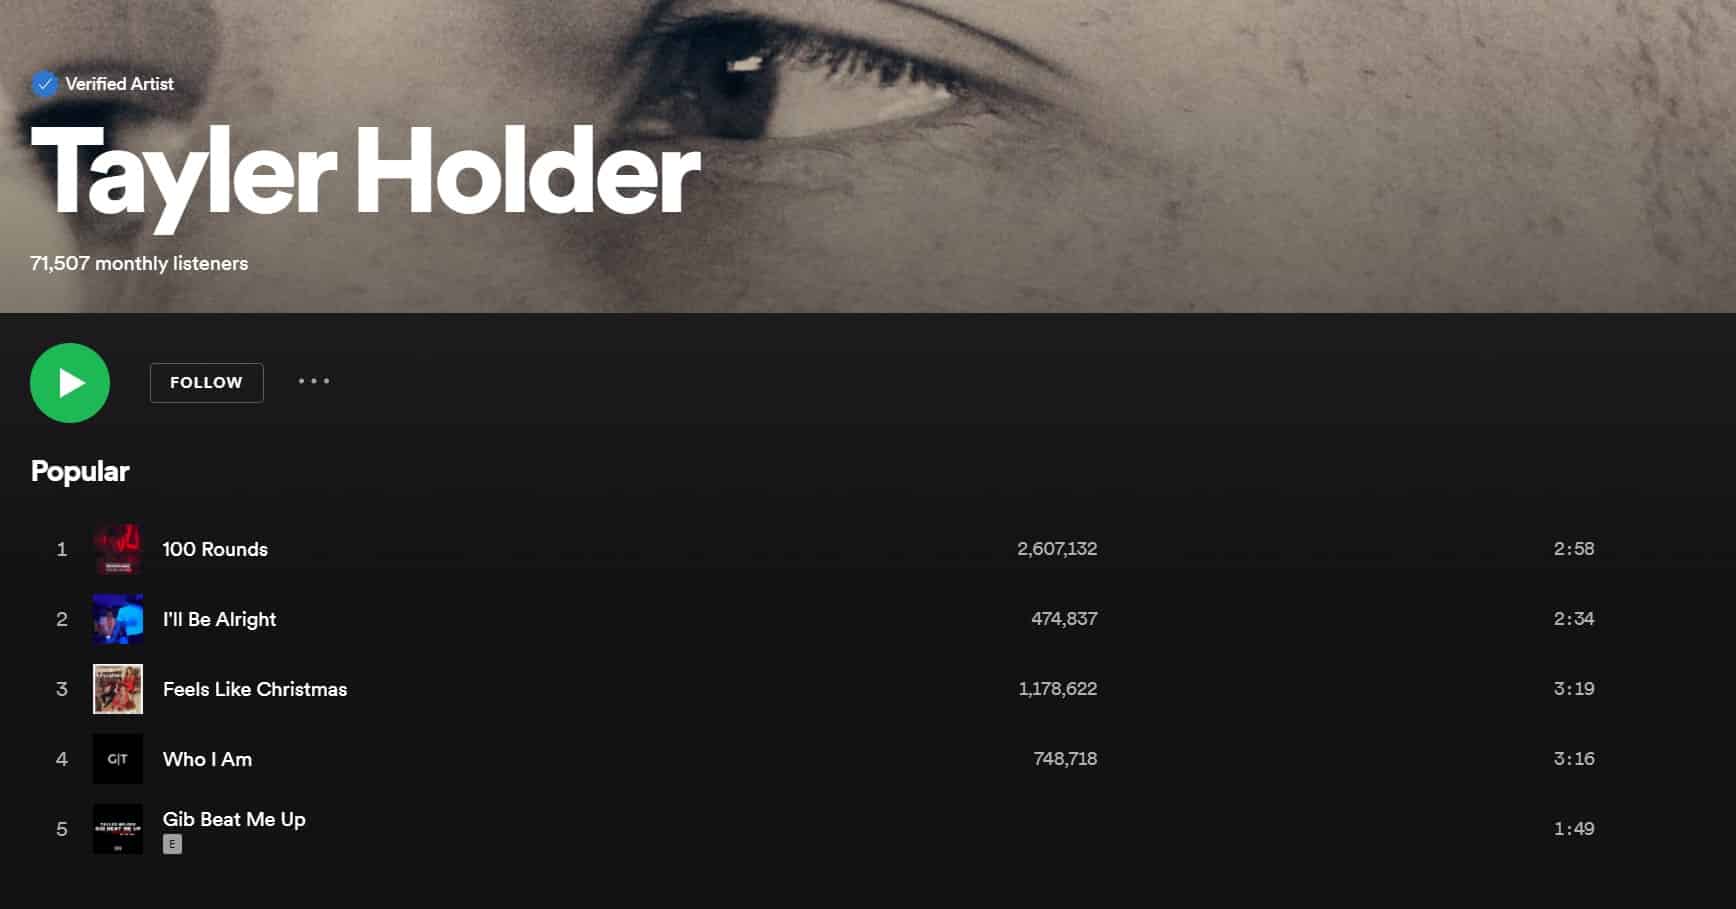 Tayler Holder Spotify page with Gib Beat Me Up track listing